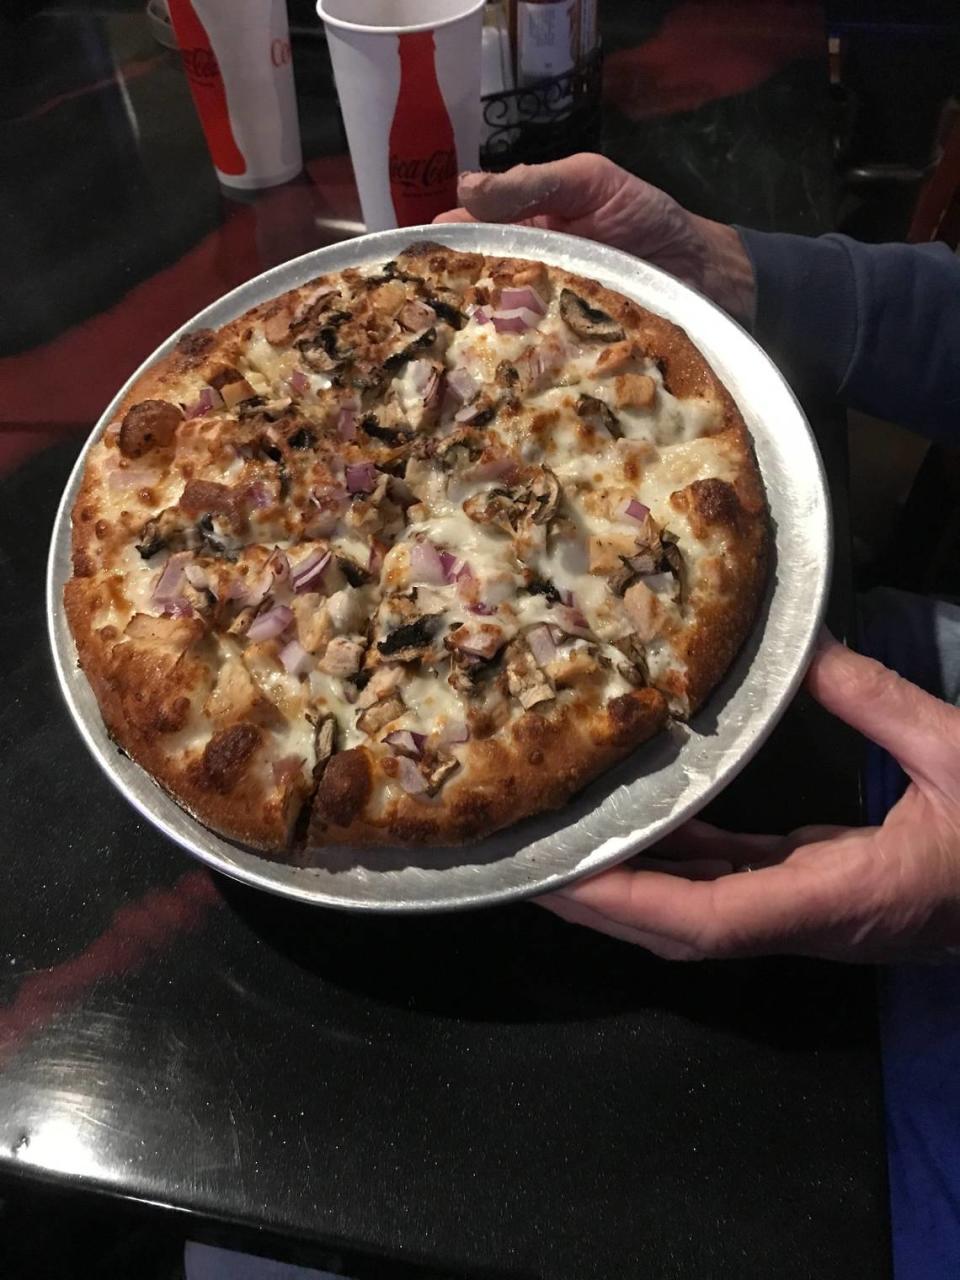 An 8-inch mini pizza from Luigi’s Pizza in Cambria holds a lot of white sauce, grilled chicken, vegetables, roasted garlic and plenty of melted mozzarella cheese.